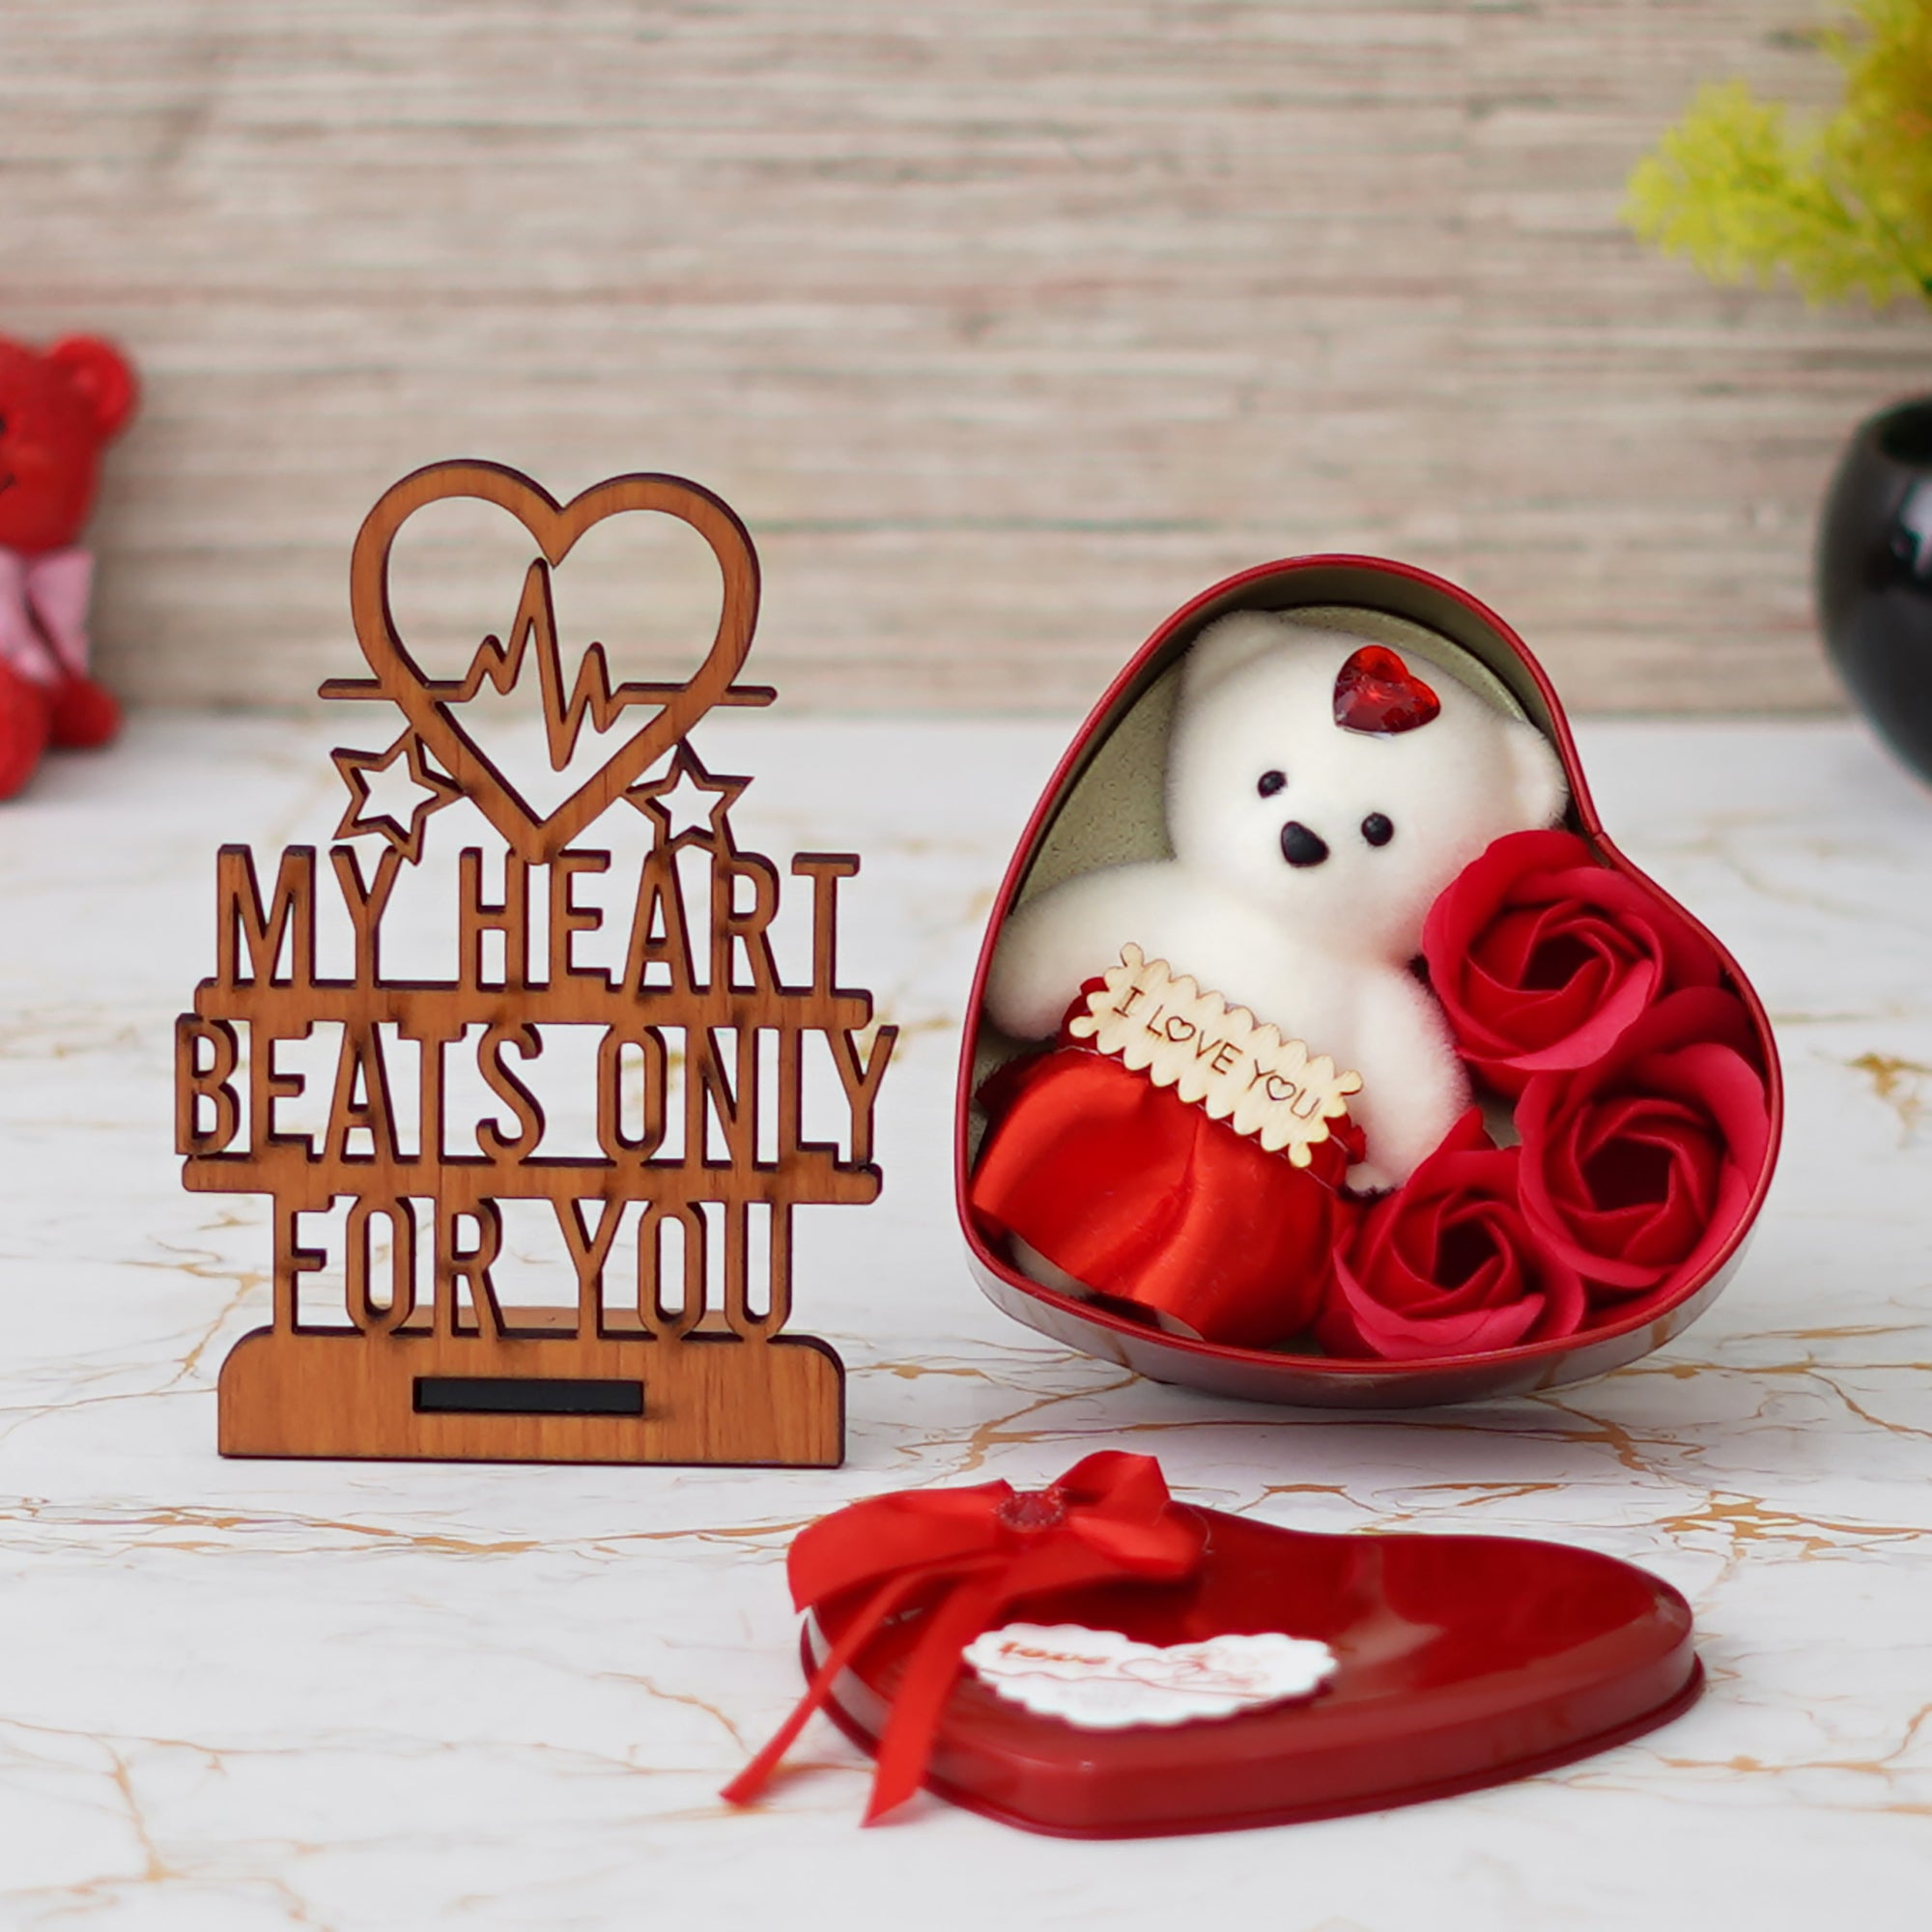 Valentine Combo of "My Heart Beats Only For You" Wooden Showpiece With Stand, Heart Shaped Gift Box Set with White Teddy and Red Roses